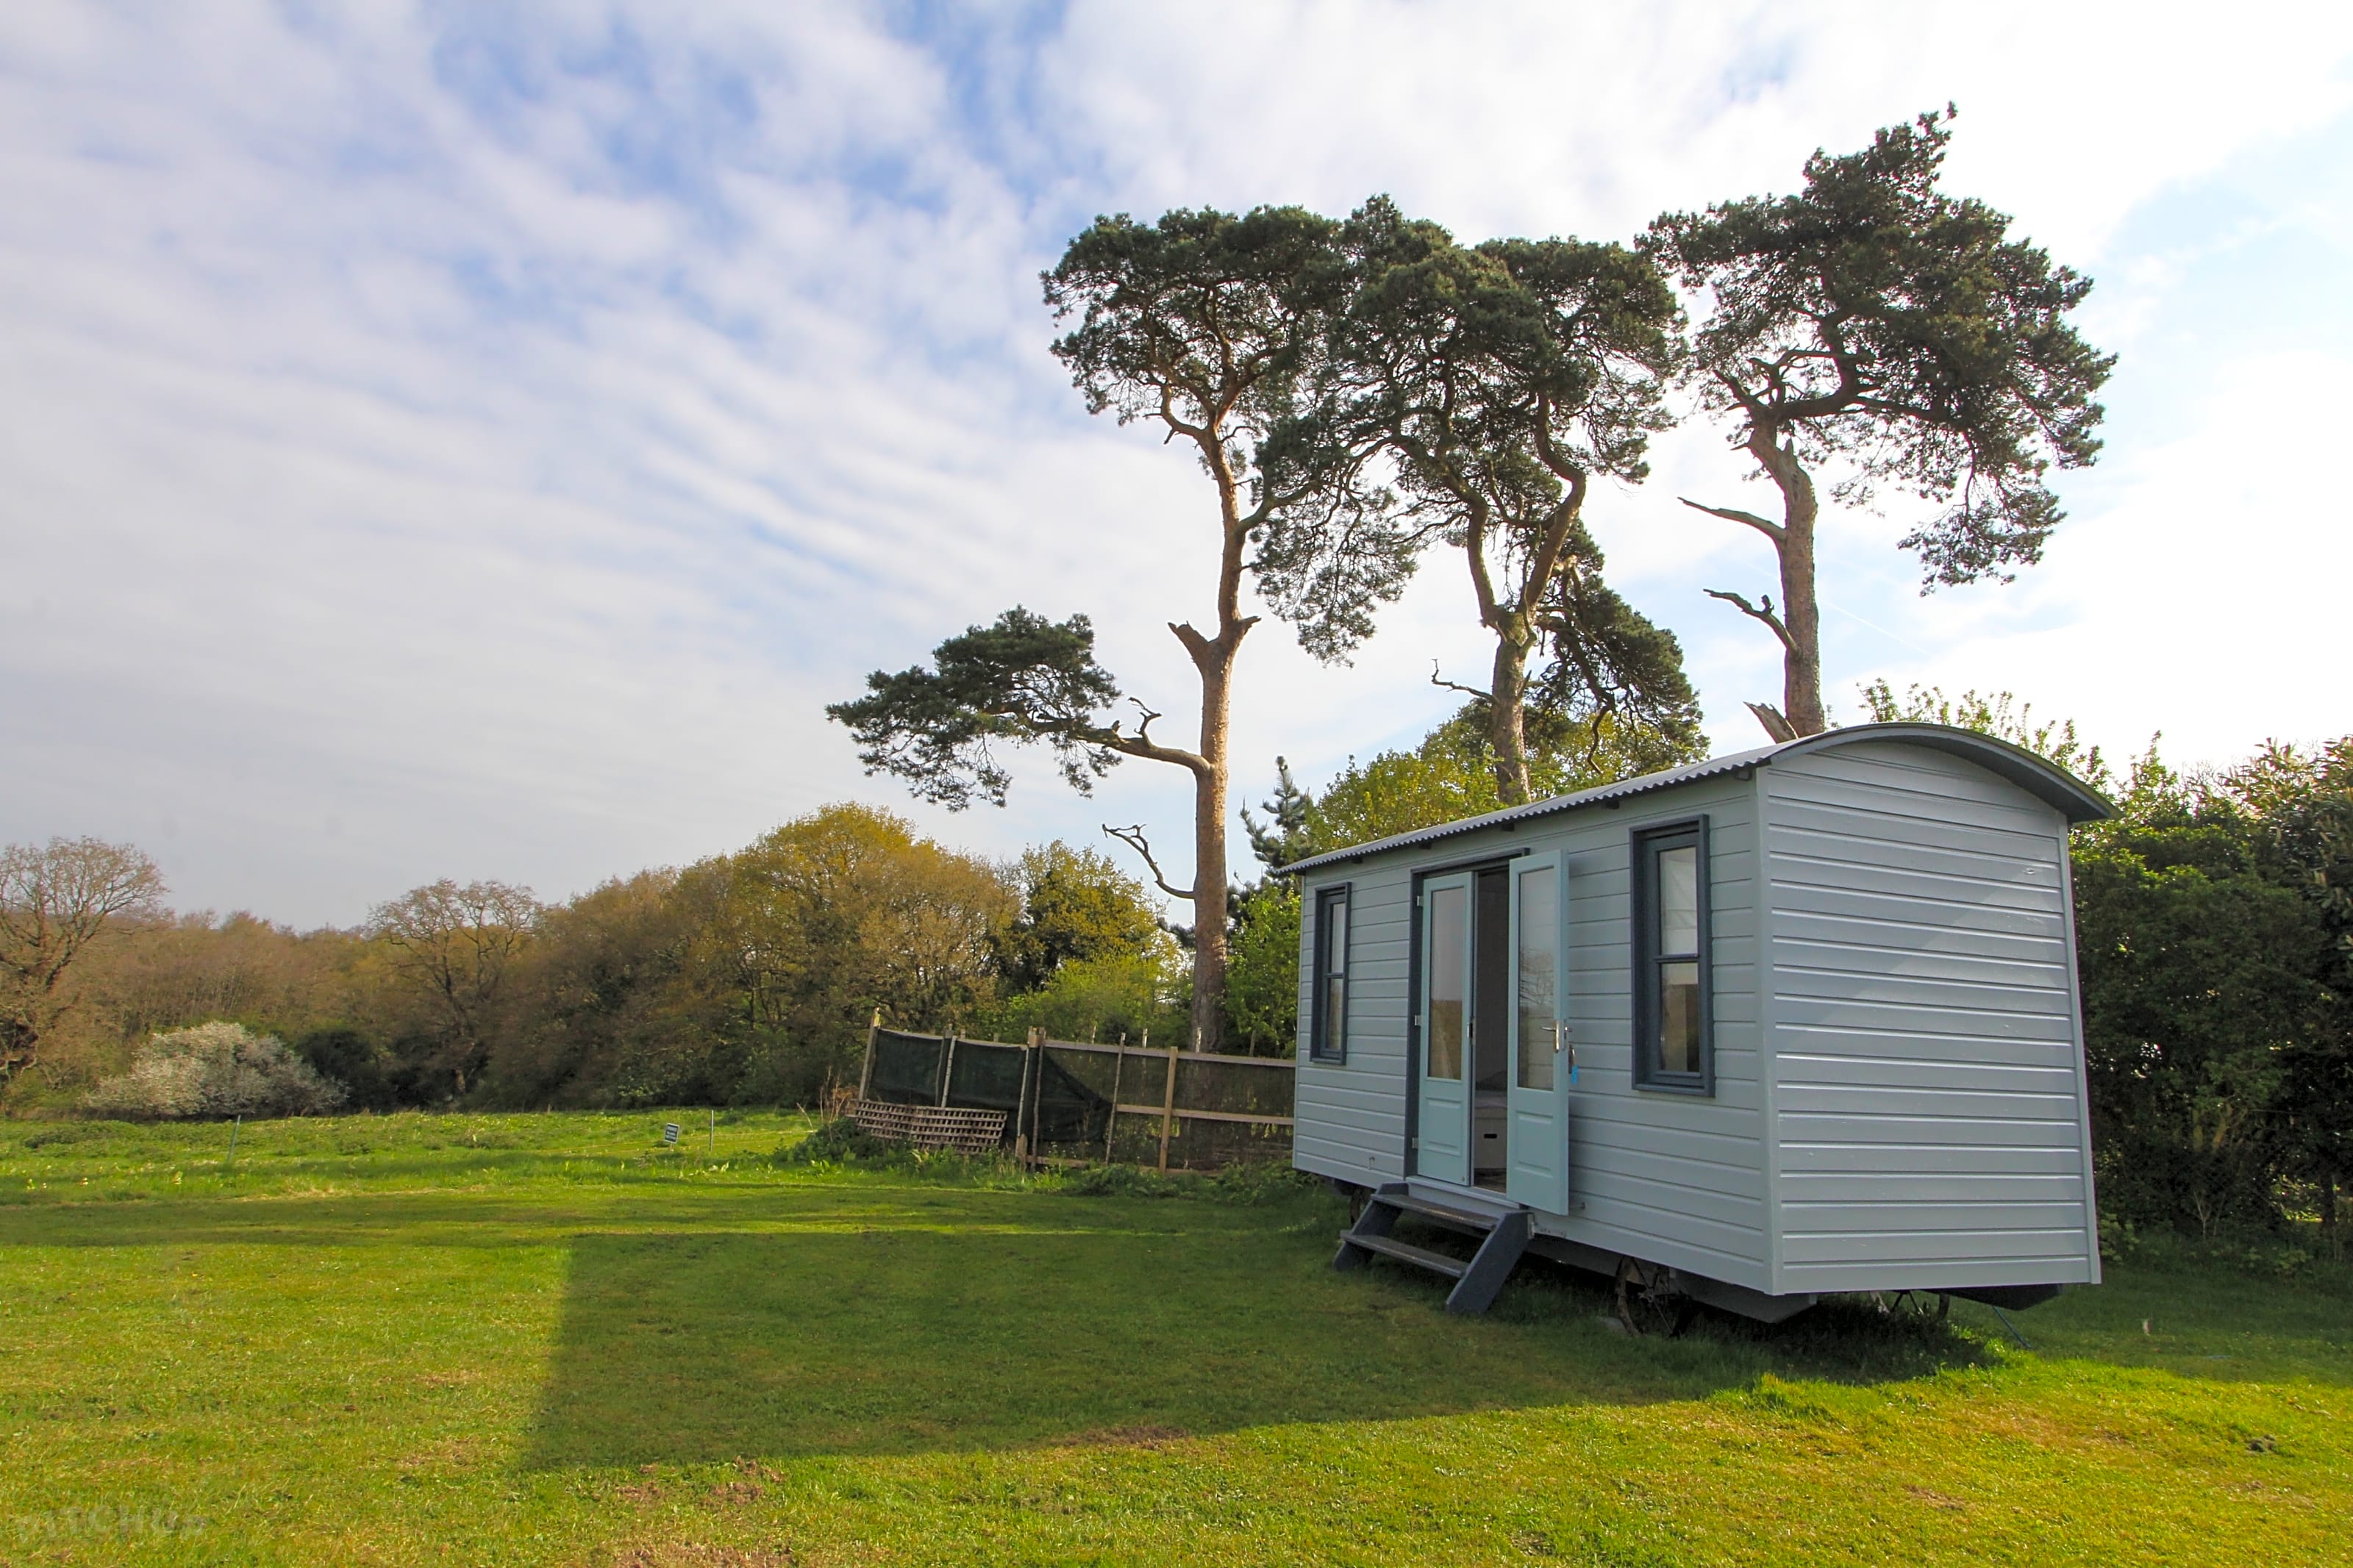 Top Farm Caravan and Camping Site, Norwich - Pitchup®